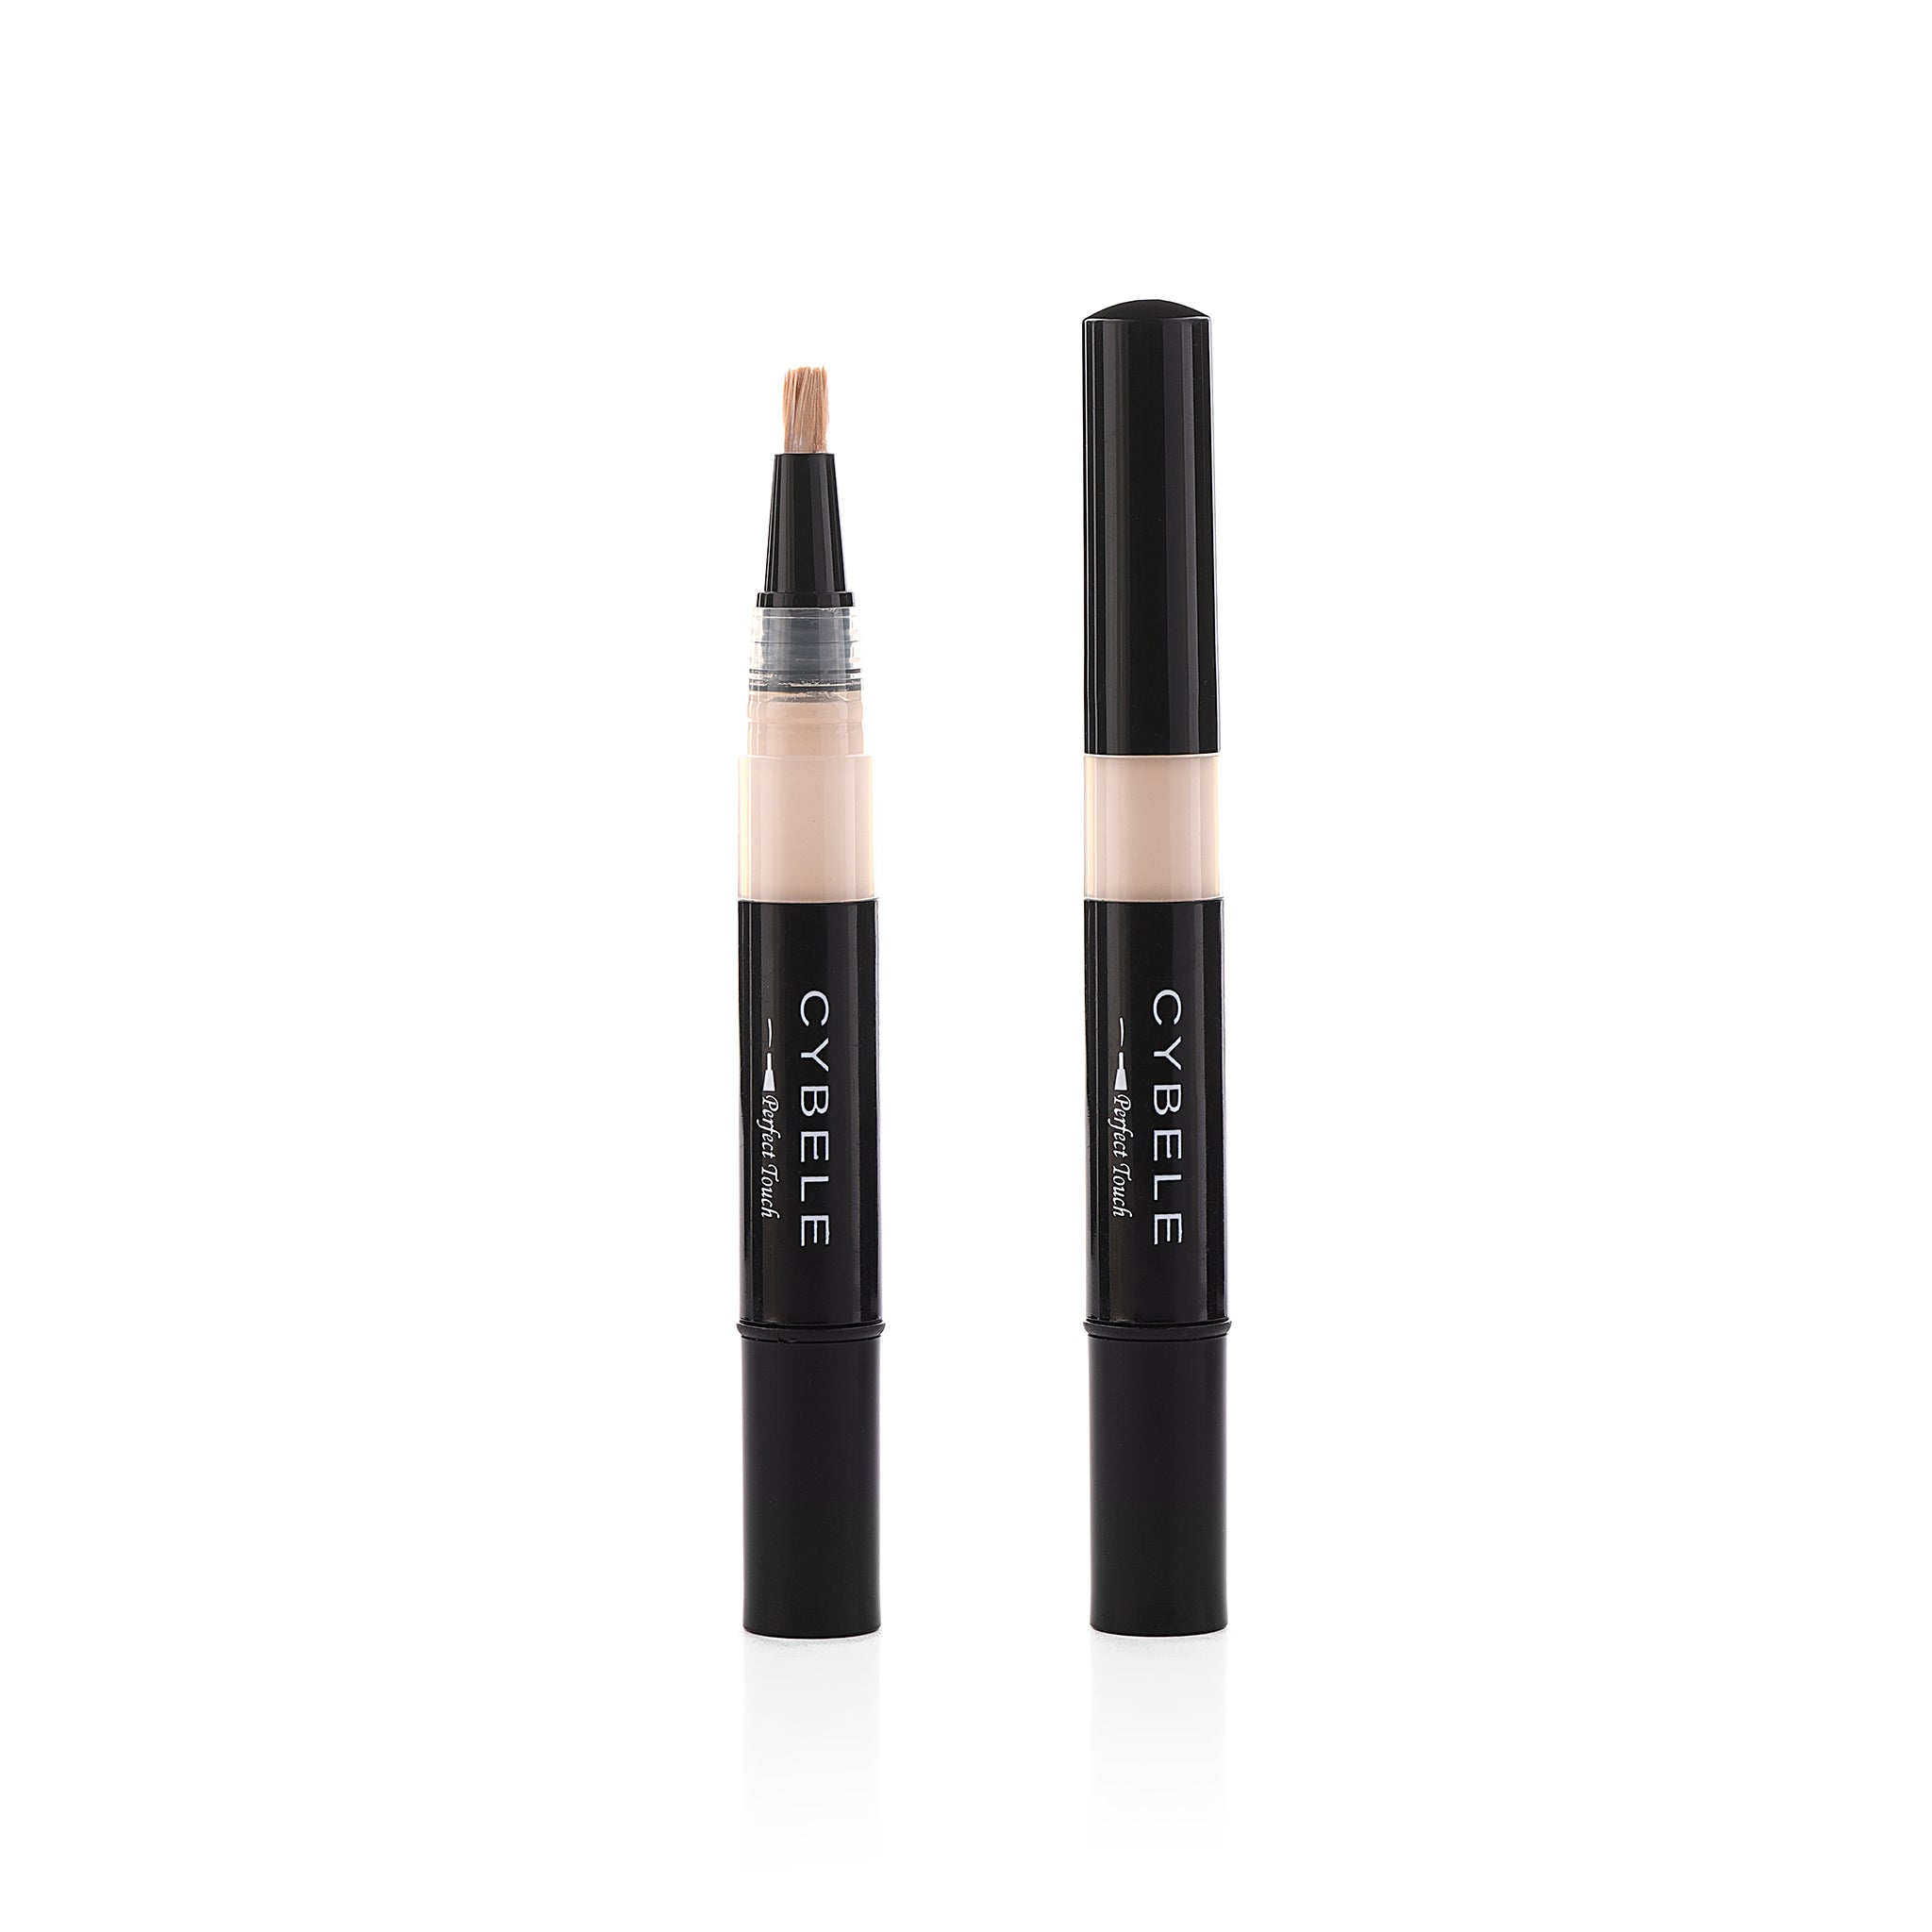 CYBELE PERFECT CONCEALER